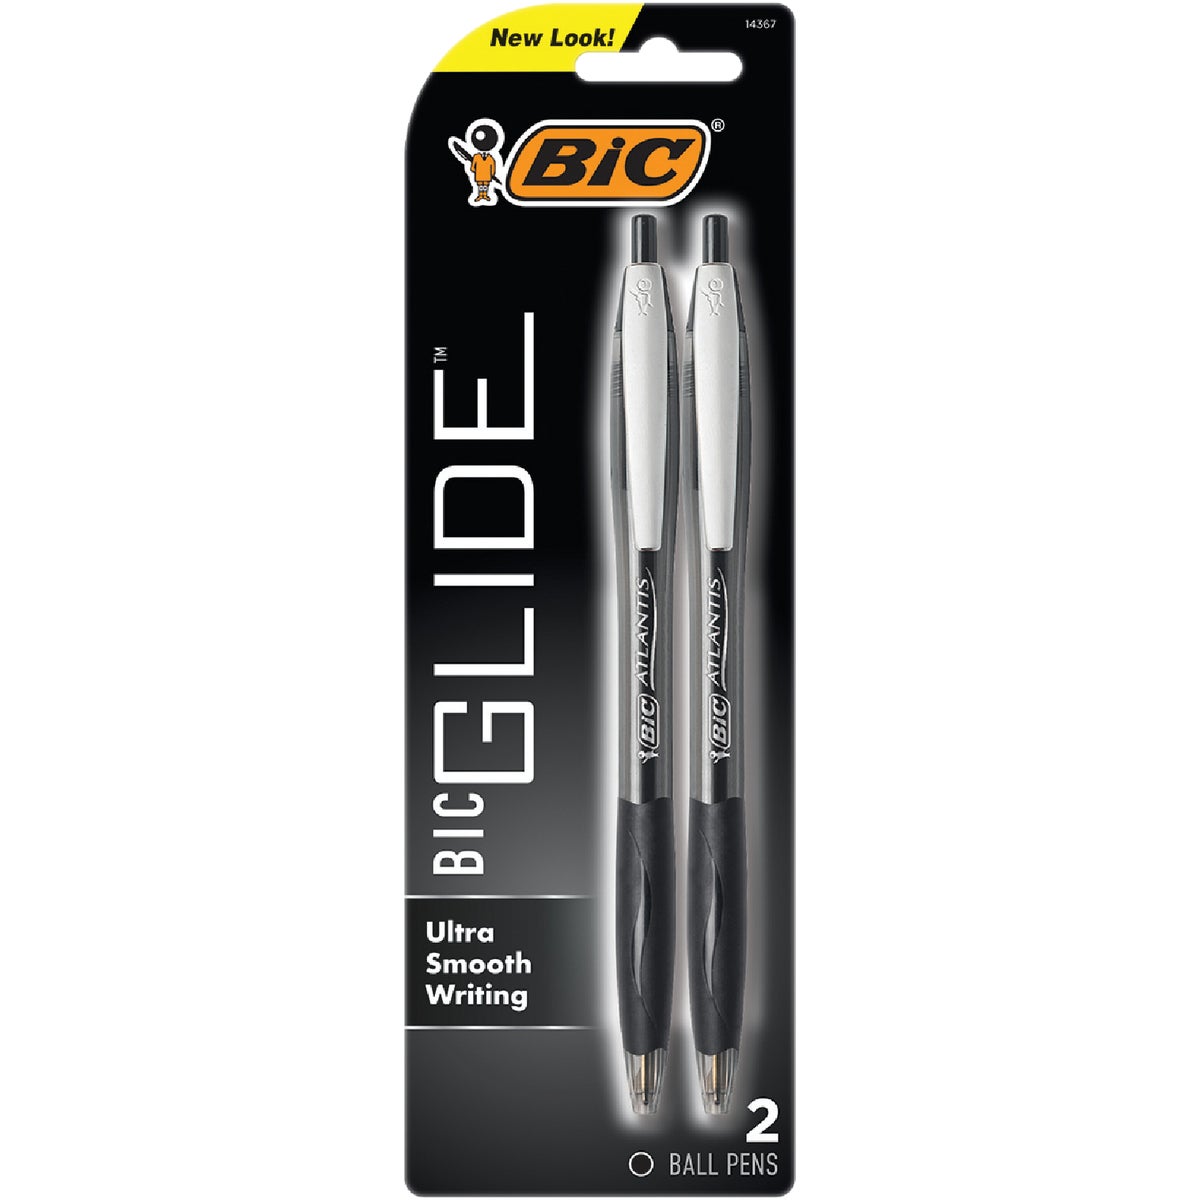 Item 970271, Professional look and feel ball point pen.